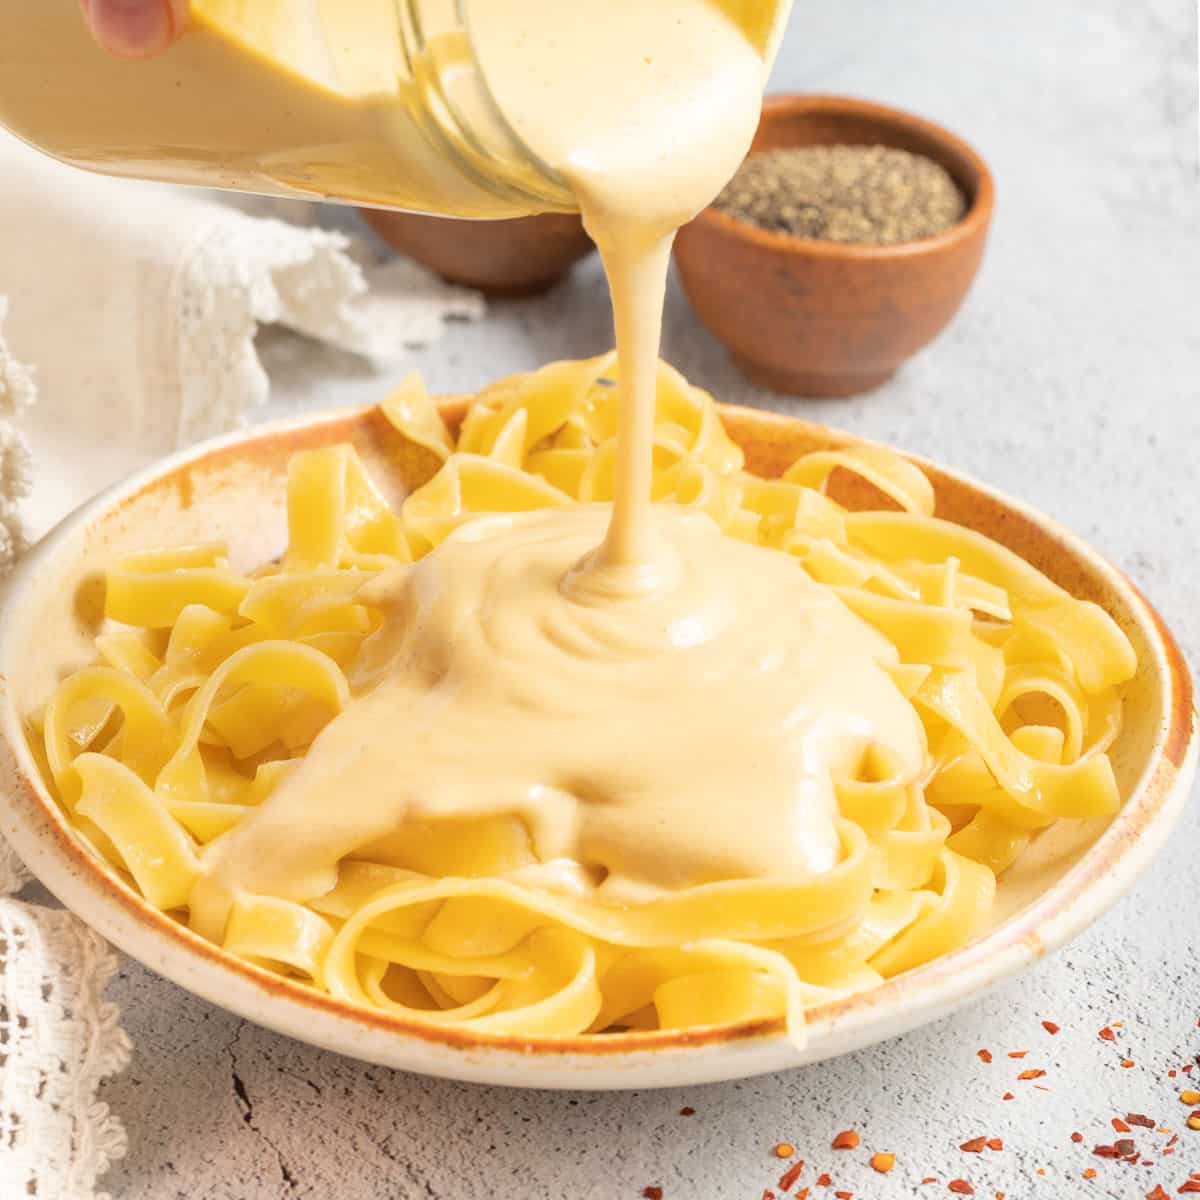 fettuccine with cheese sauce pouring over